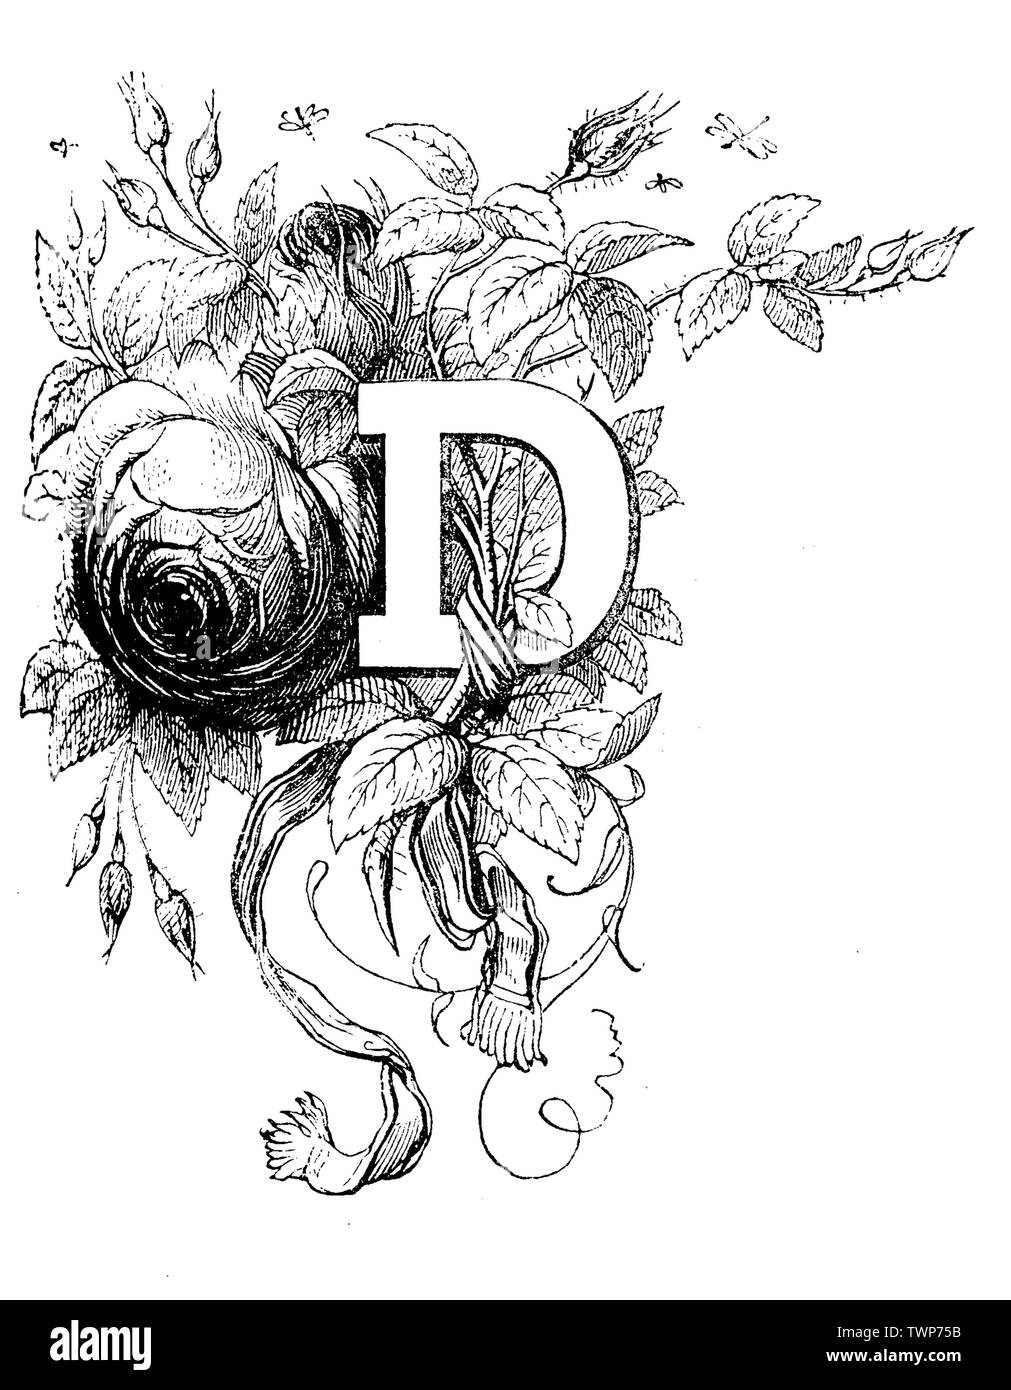 Ornate capital letter D, a floral start chapter, typographic vintage engraving Stock Photo